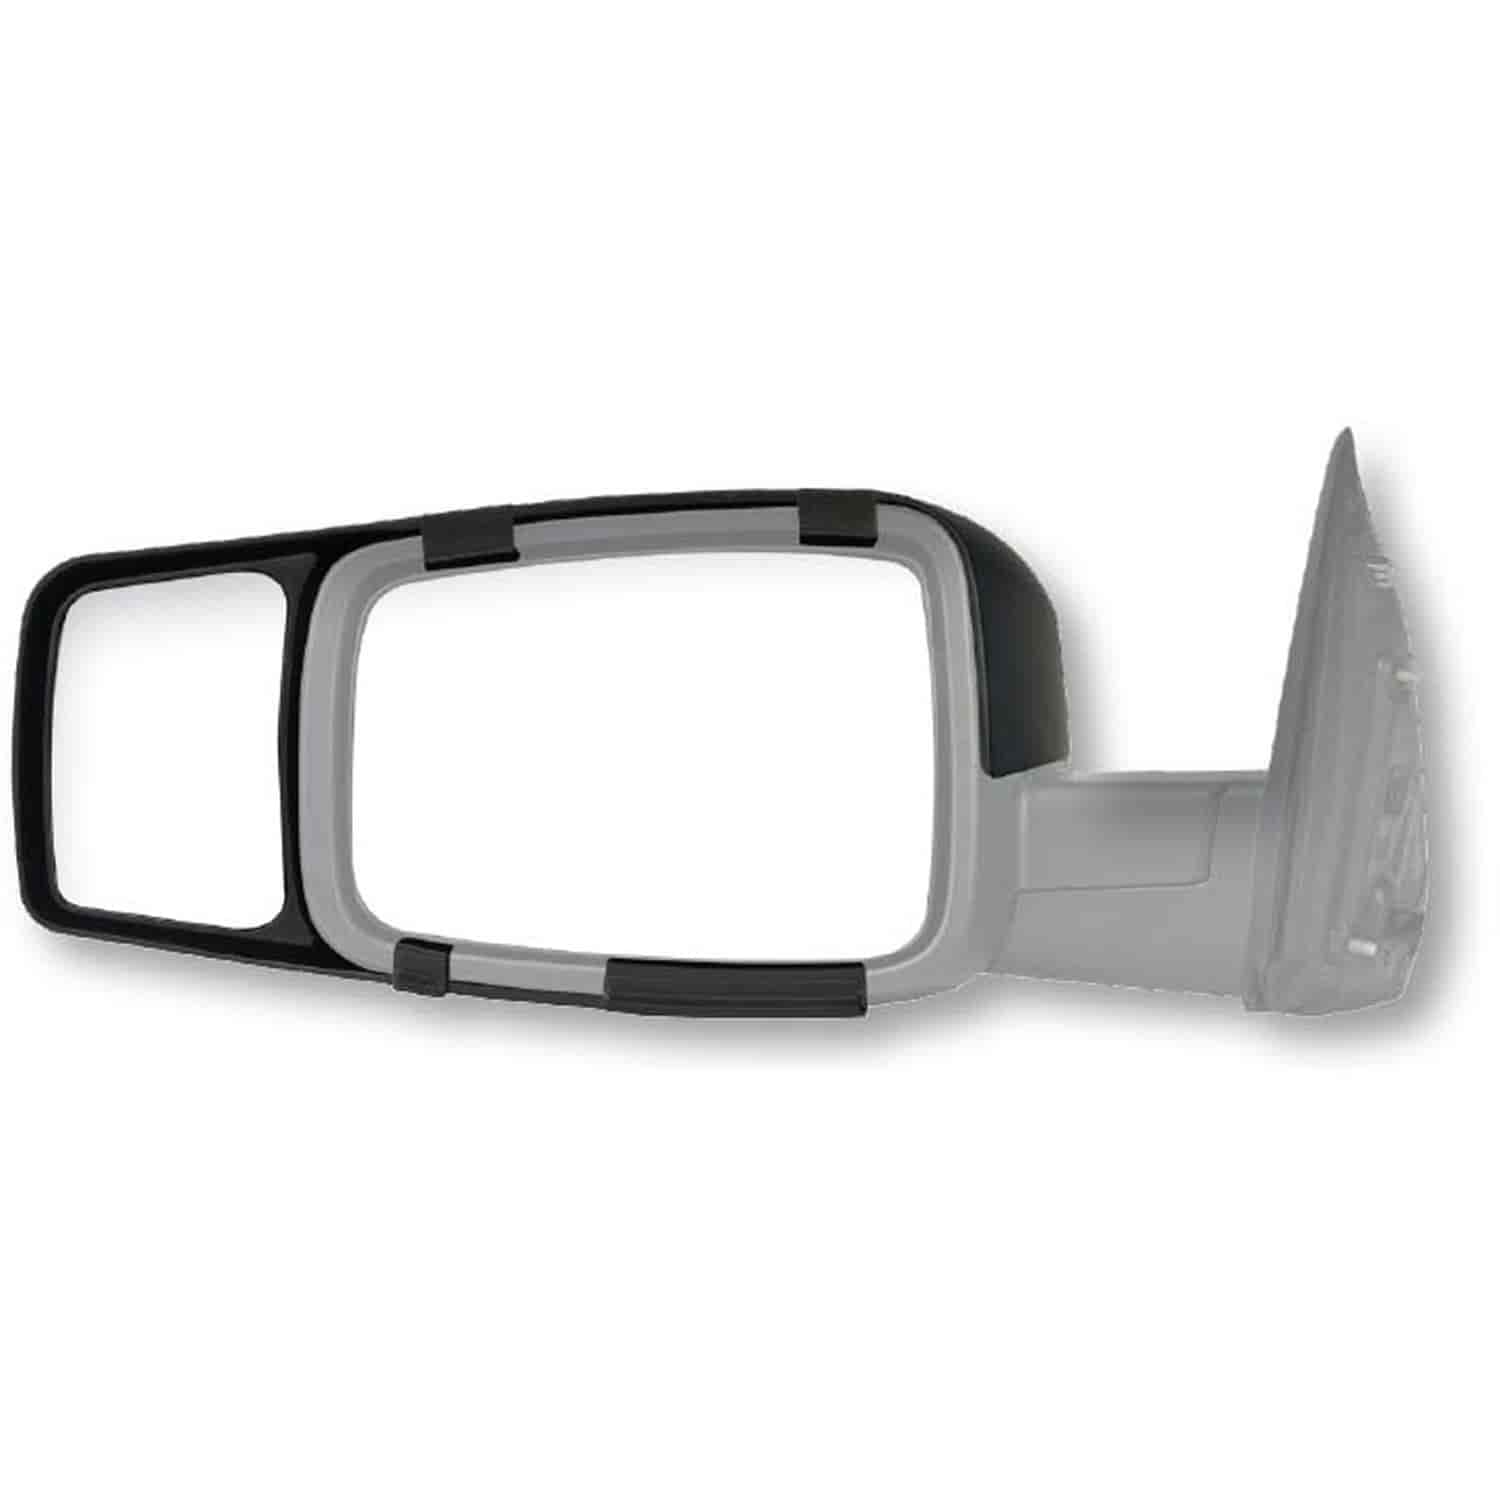 K-Source 80710: Snap-On Towing Mirrors Fits 2009 to 2014 Ram 1500 - JEGS